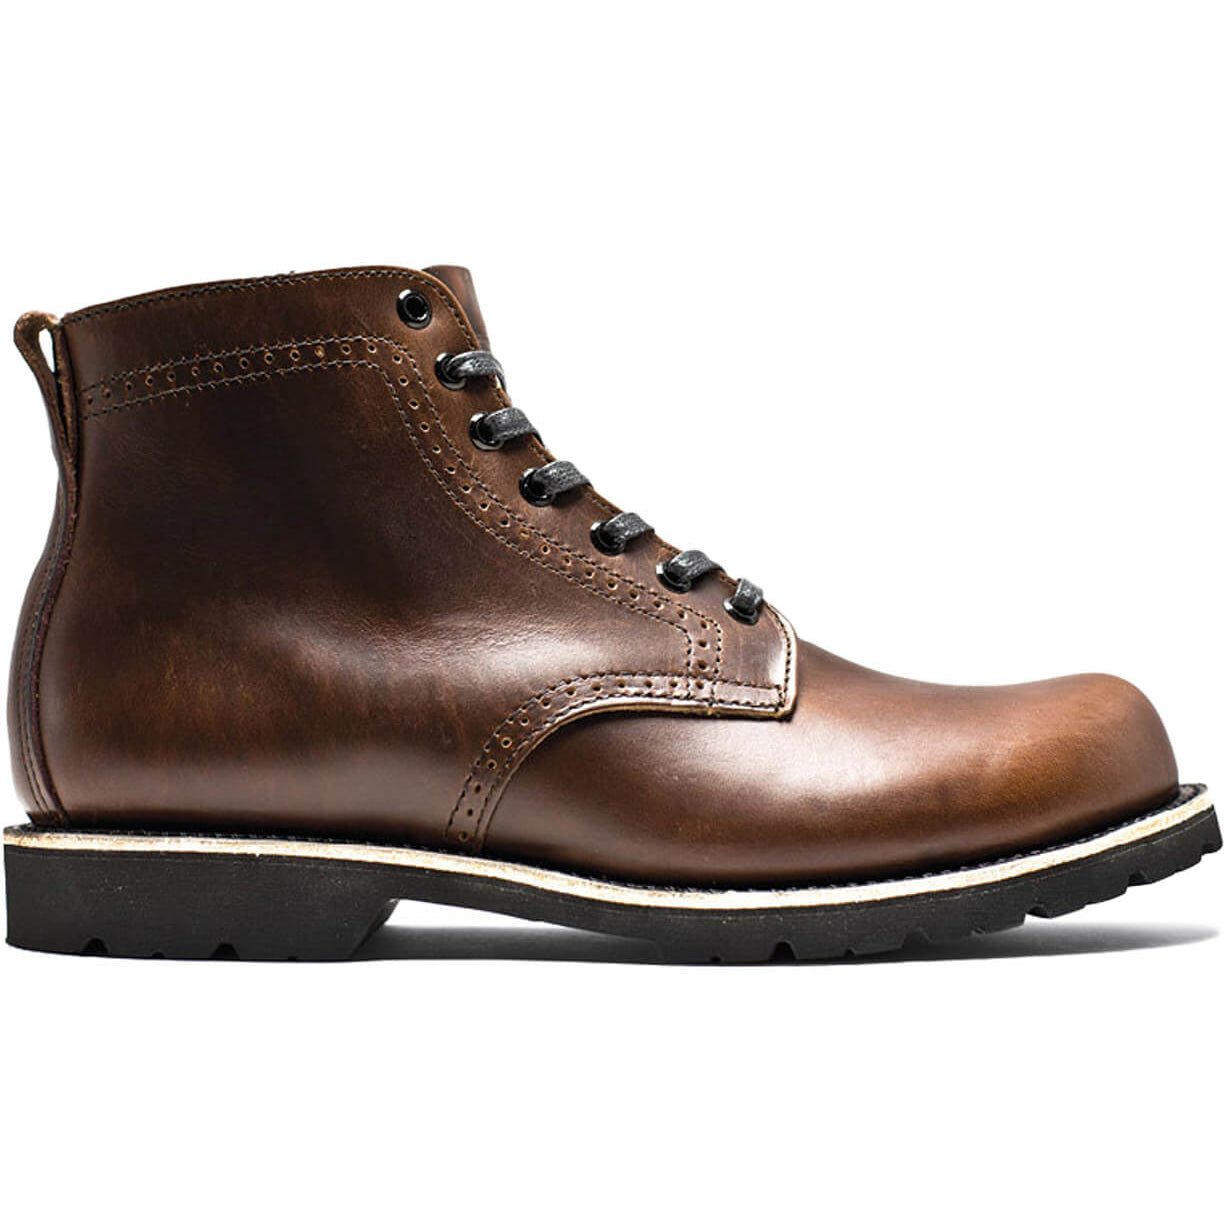 The Tydus men's brown leather boot with a rugged outsole is shown on a white background, highlighting Broken Homme's refined style.